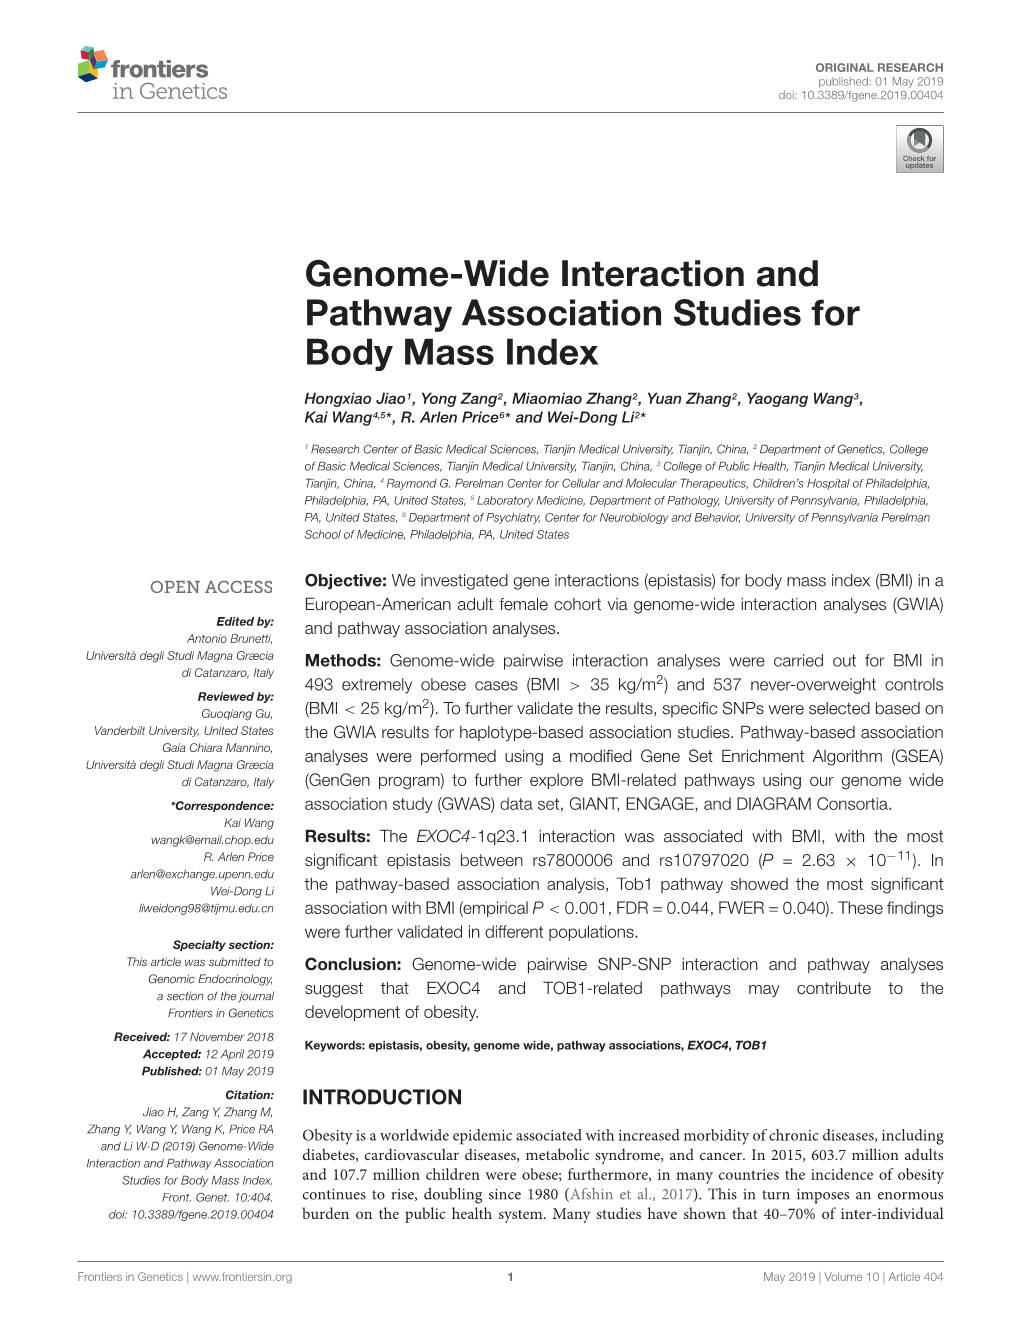 Genome-Wide Interaction and Pathway Association Studies for Body Mass Index